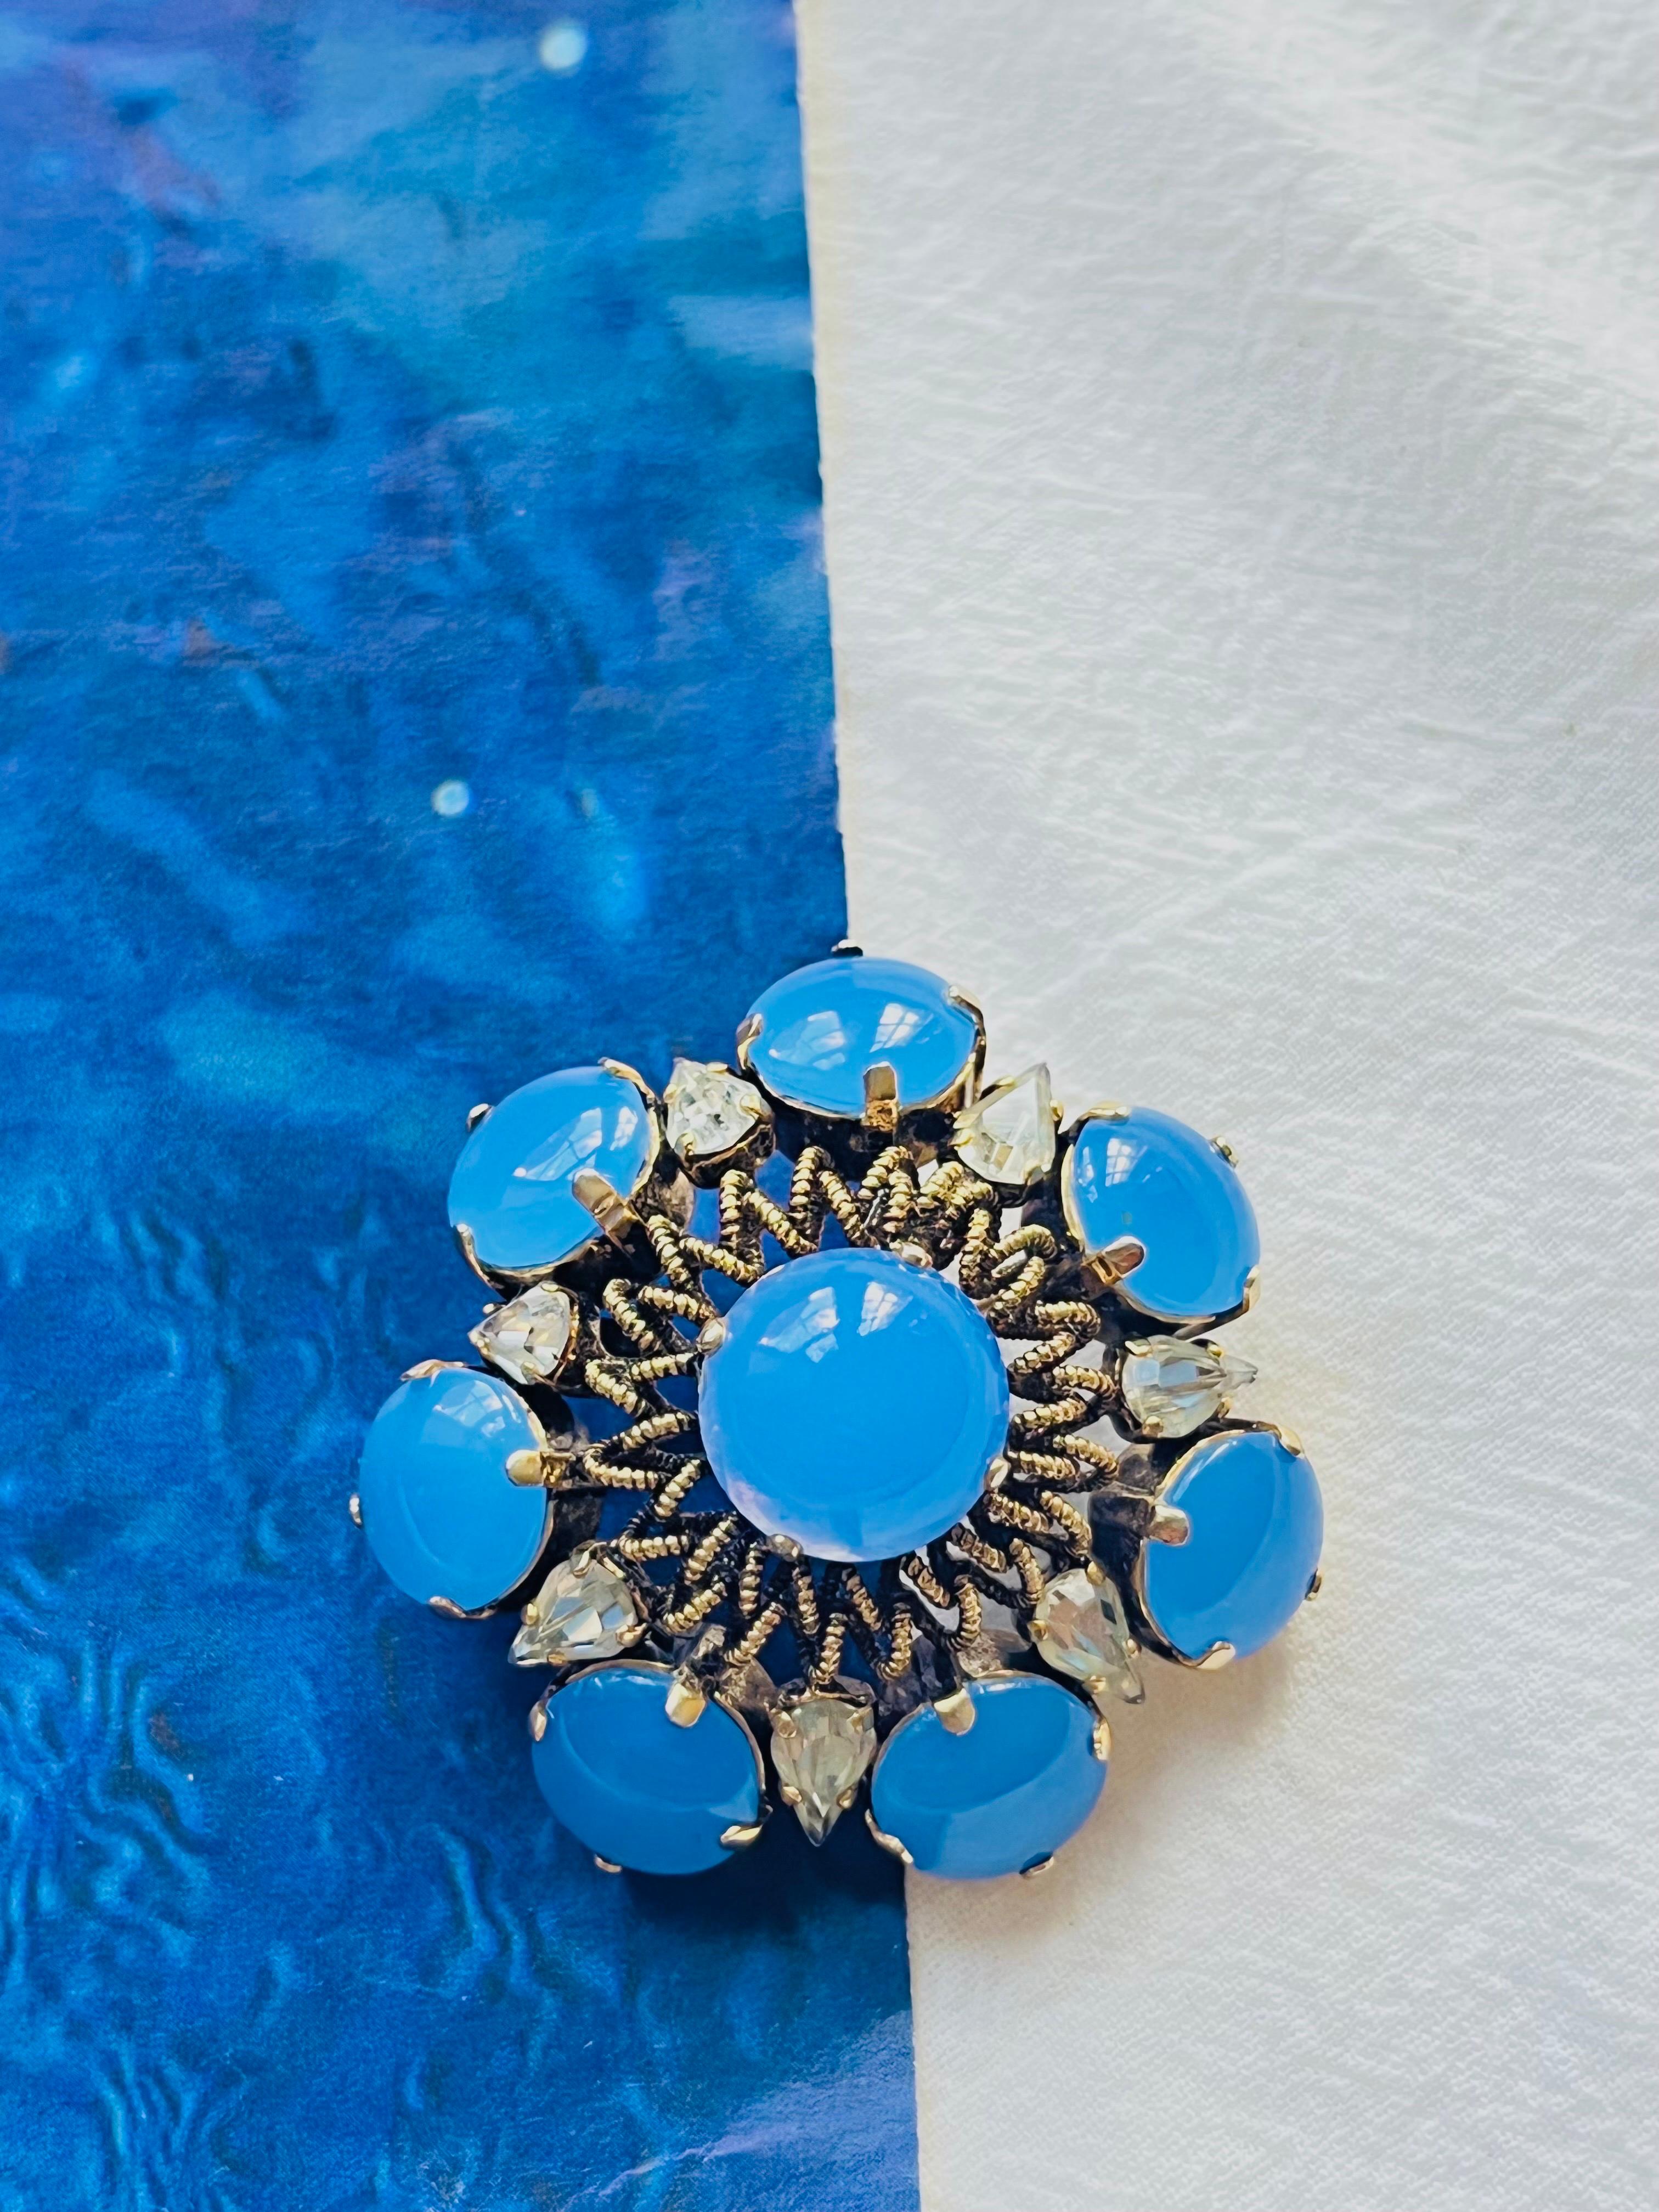 Christian Dior Vintage 1964 Sapphire Milky Blue Cabochon Wreath Flower Water Drop Crystals Openwork Exquisite Brooch, Gold Plated

Very good condition. 100% genuine. Rare to find. 

A unique piece. This is gold plated stylised brooch. Signed 